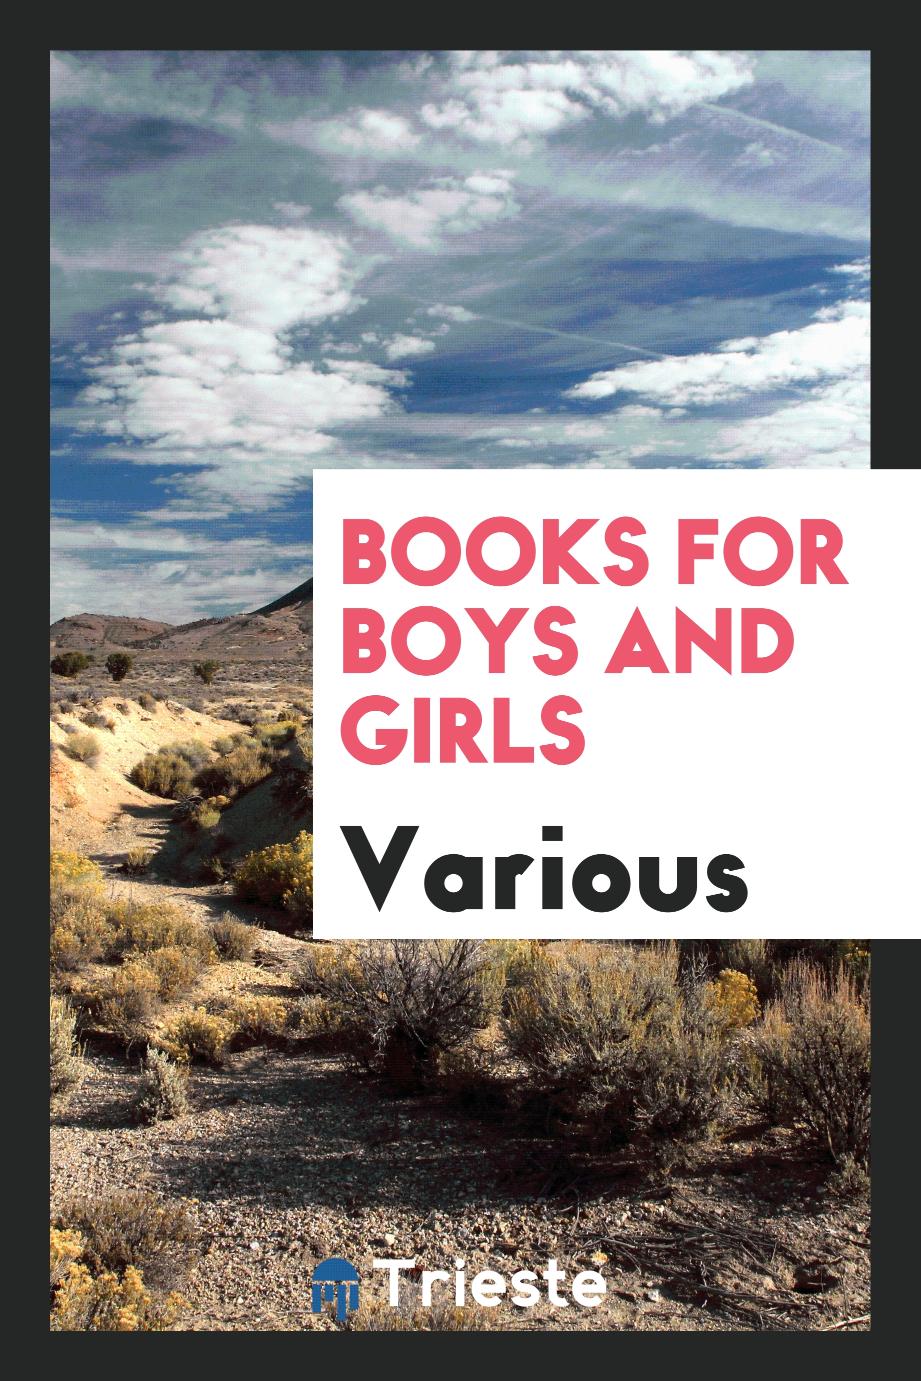 Books for Boys and Girls